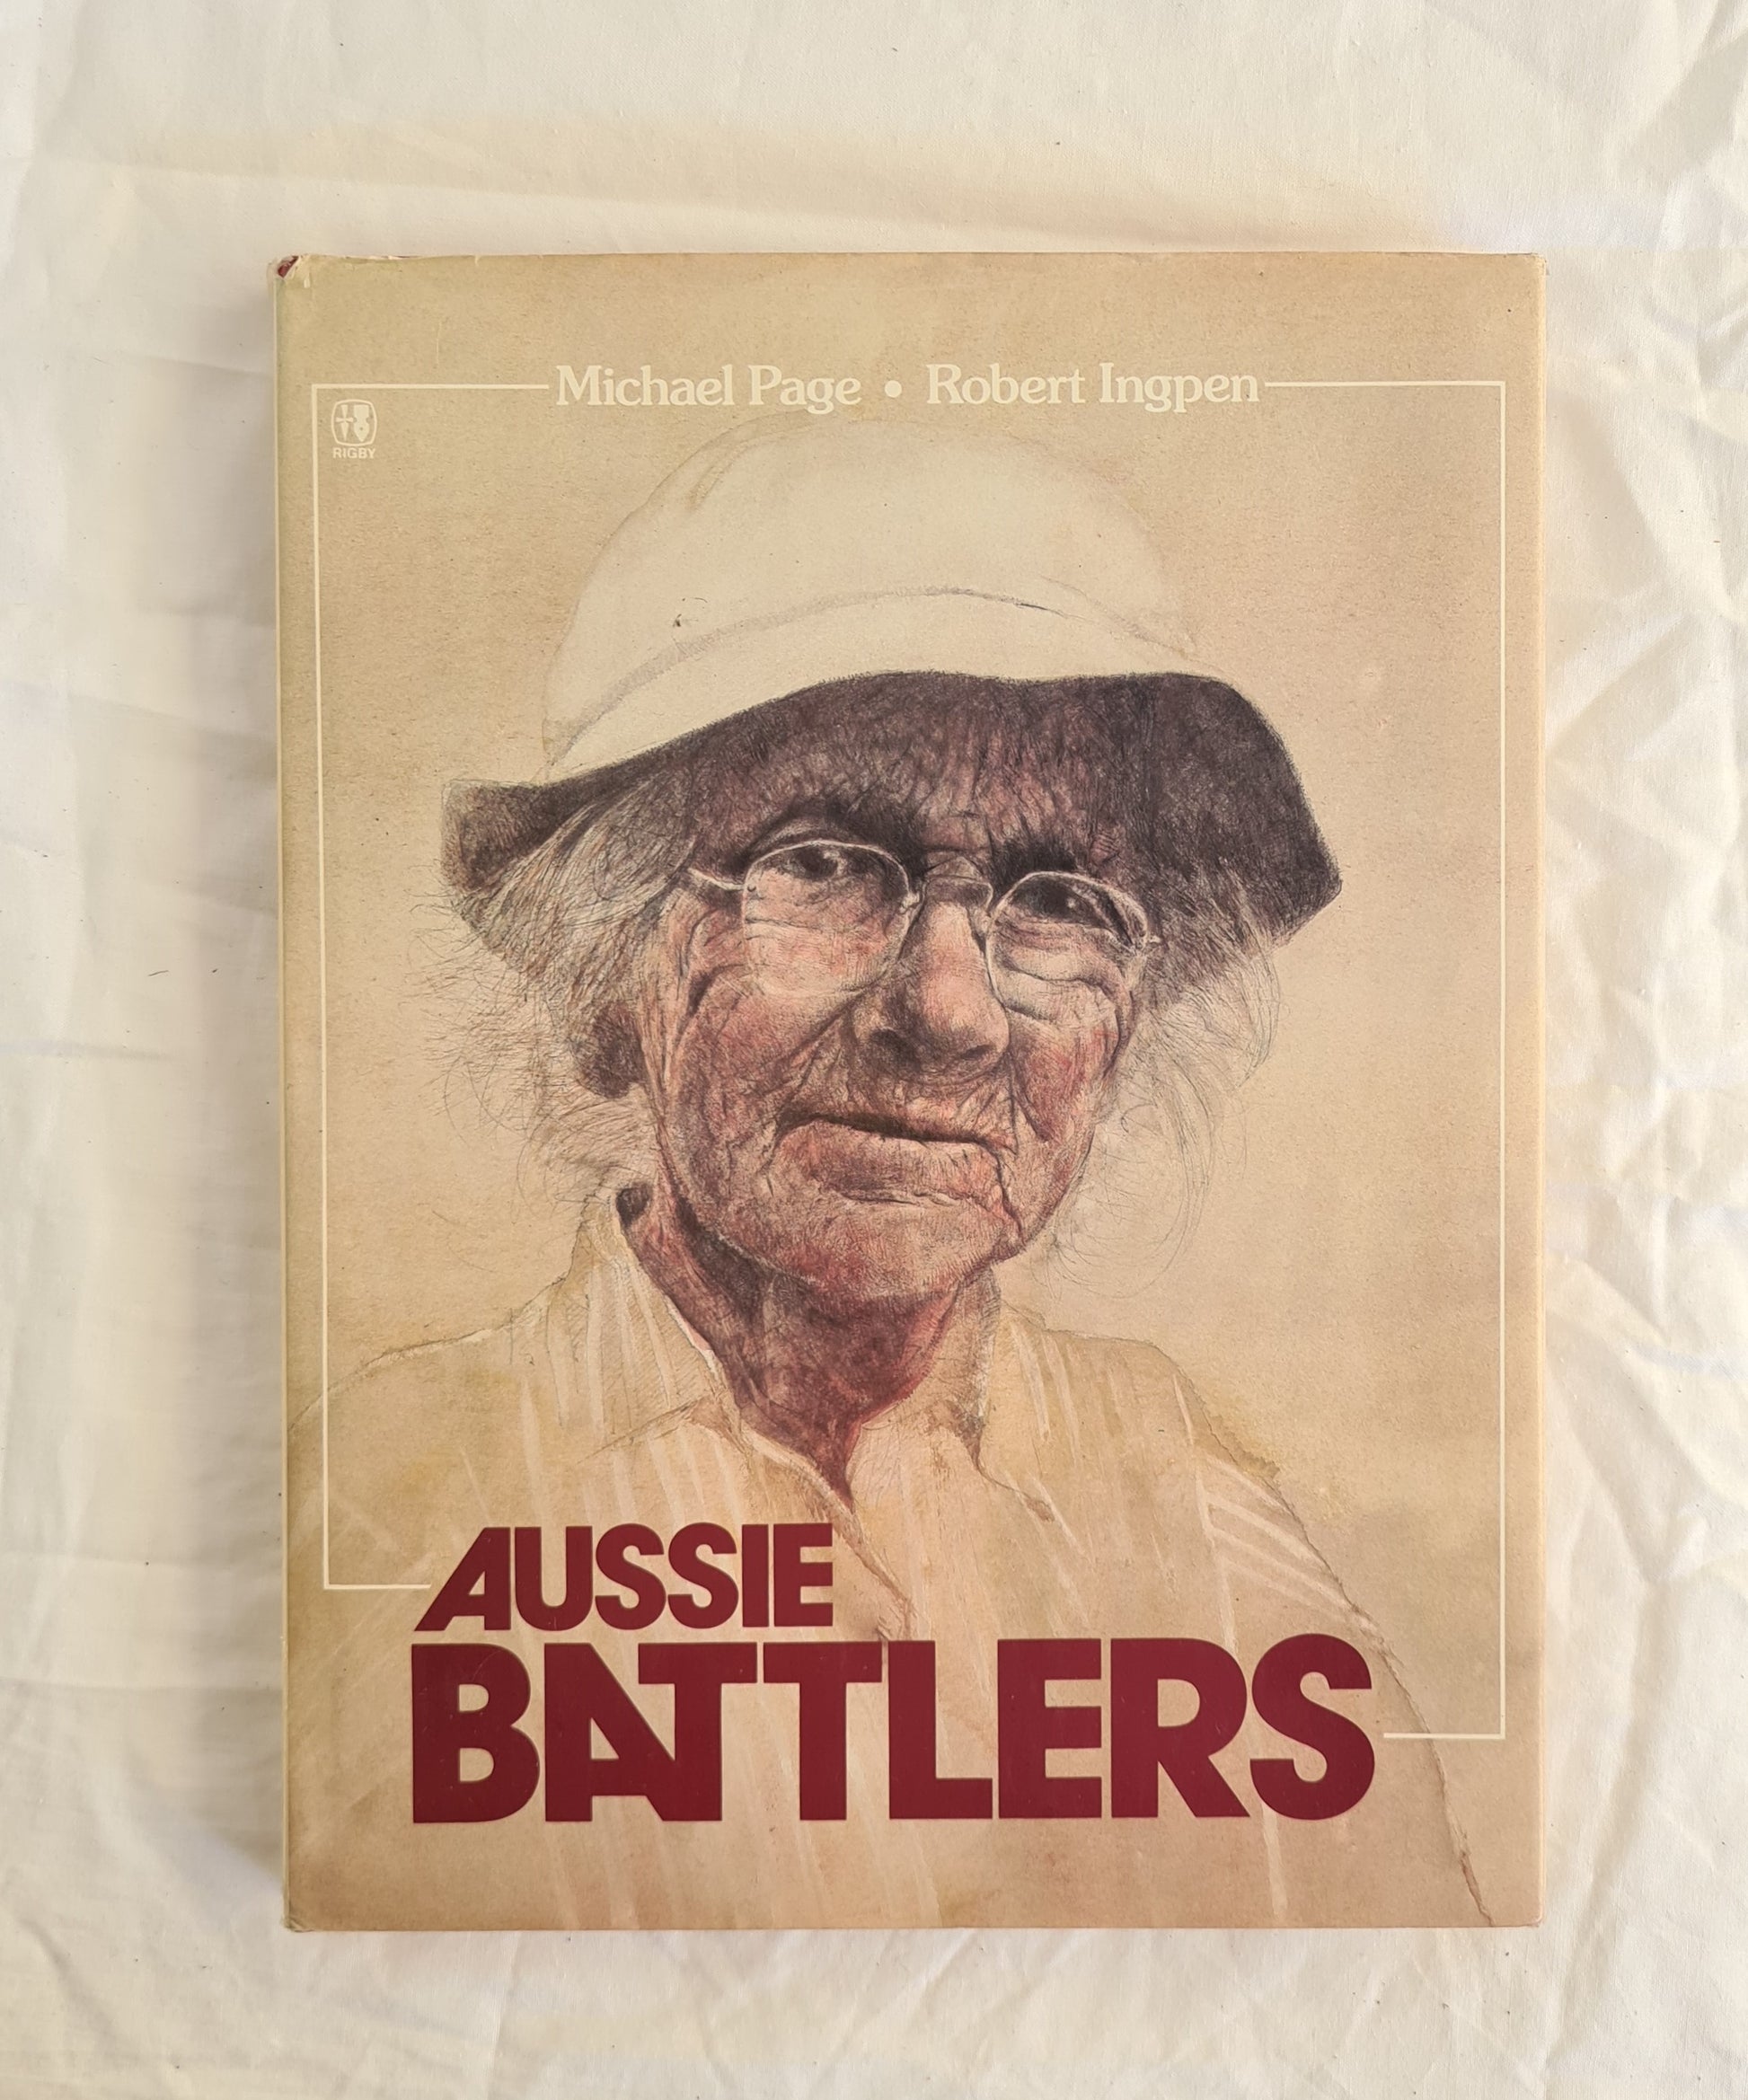 Aussie Battlers by Michael Page and Robert Ingpen